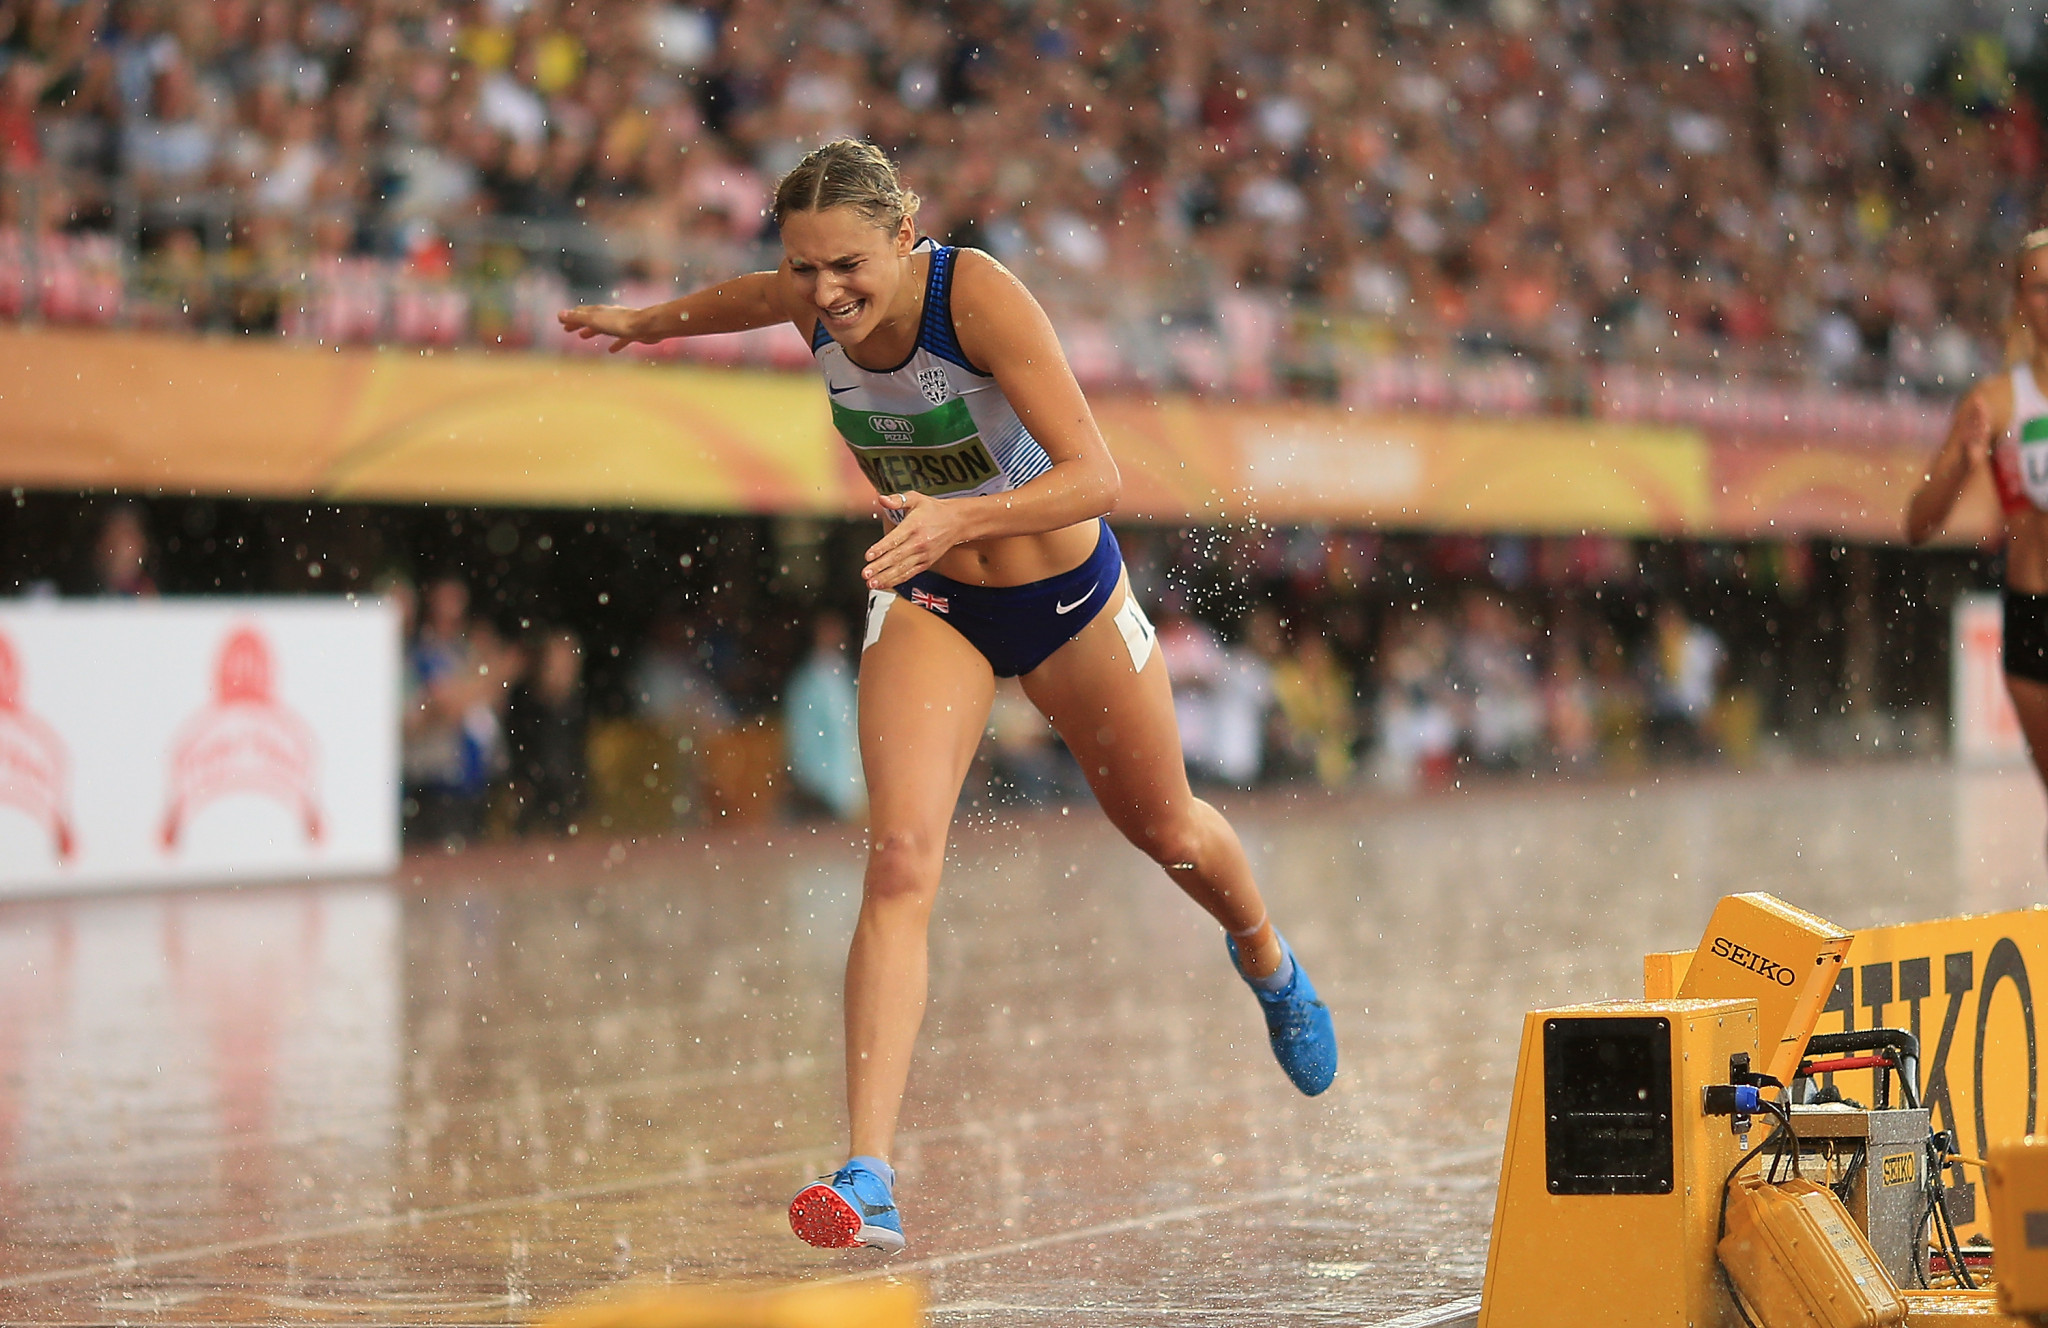 Britain's Niamh Emerson secures world under-20 heptathlon gold as she wins the concluding 800m in driving rain at Tampere's Ratina Stadium ©Getty Images  